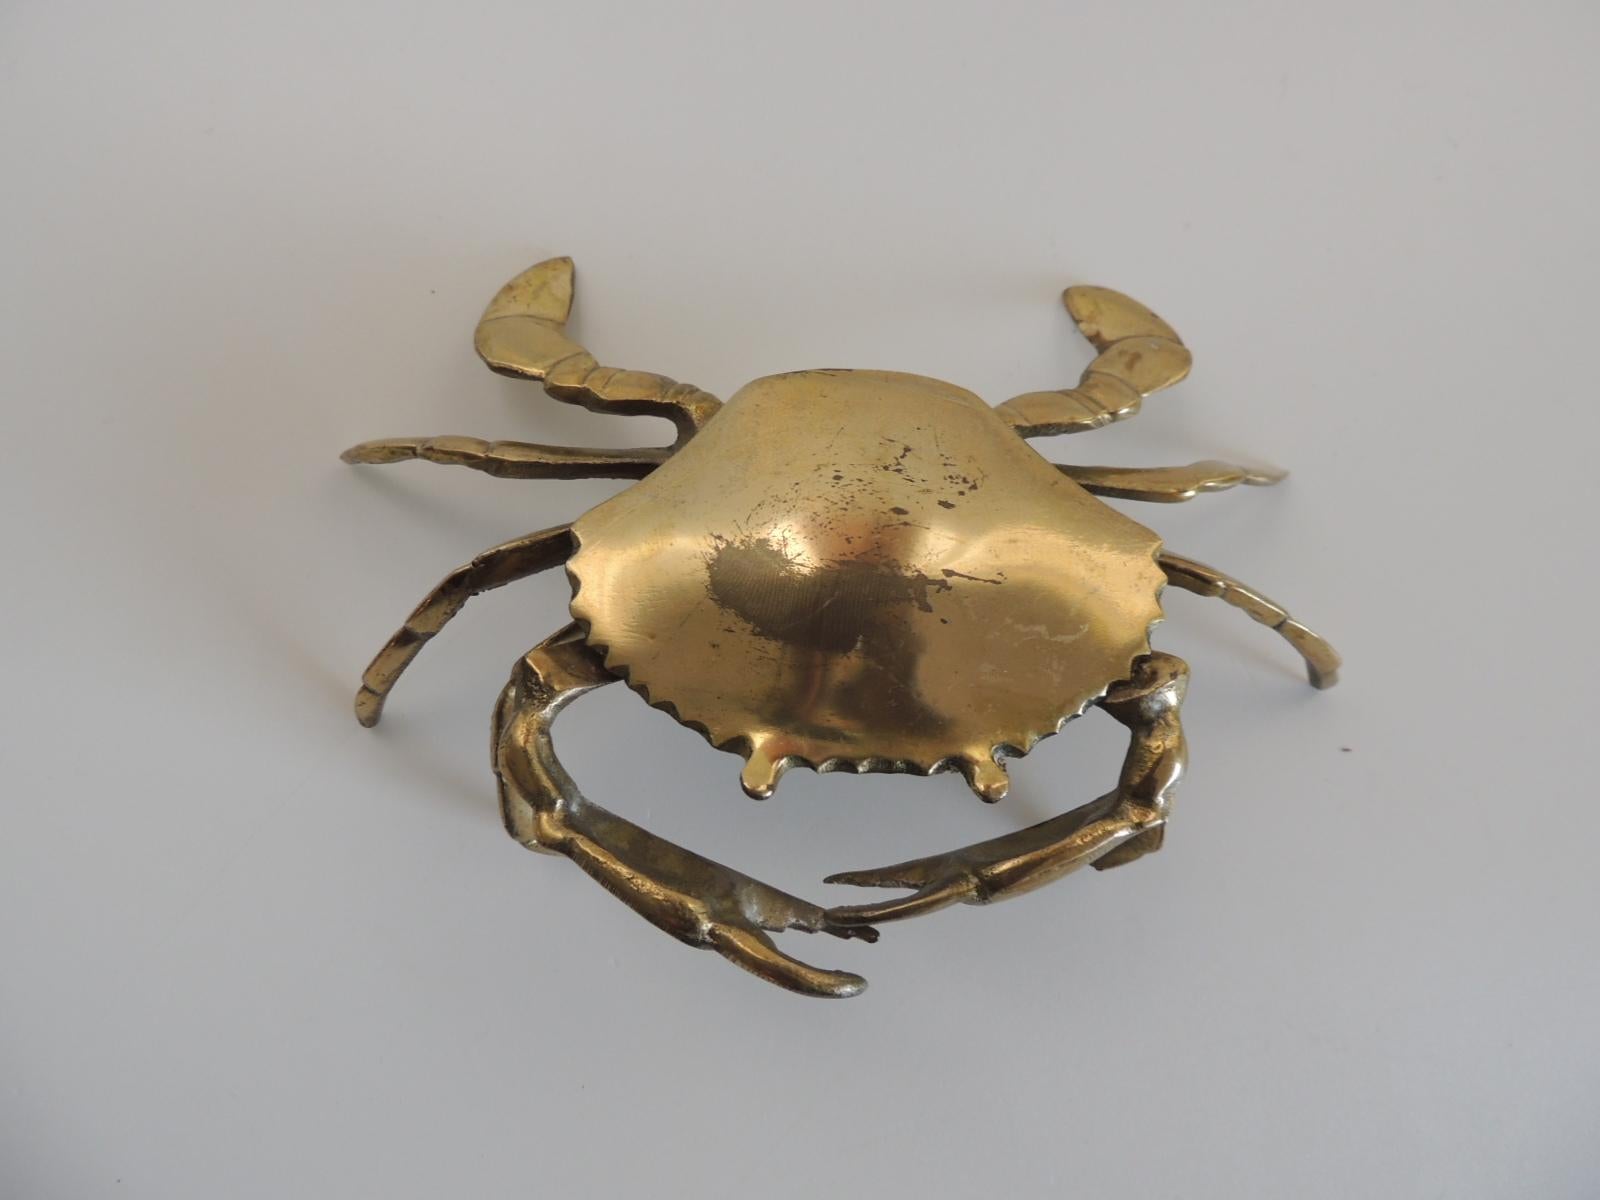 Vintage articulated brass crab ashtray.
(life-size)
Size: 8